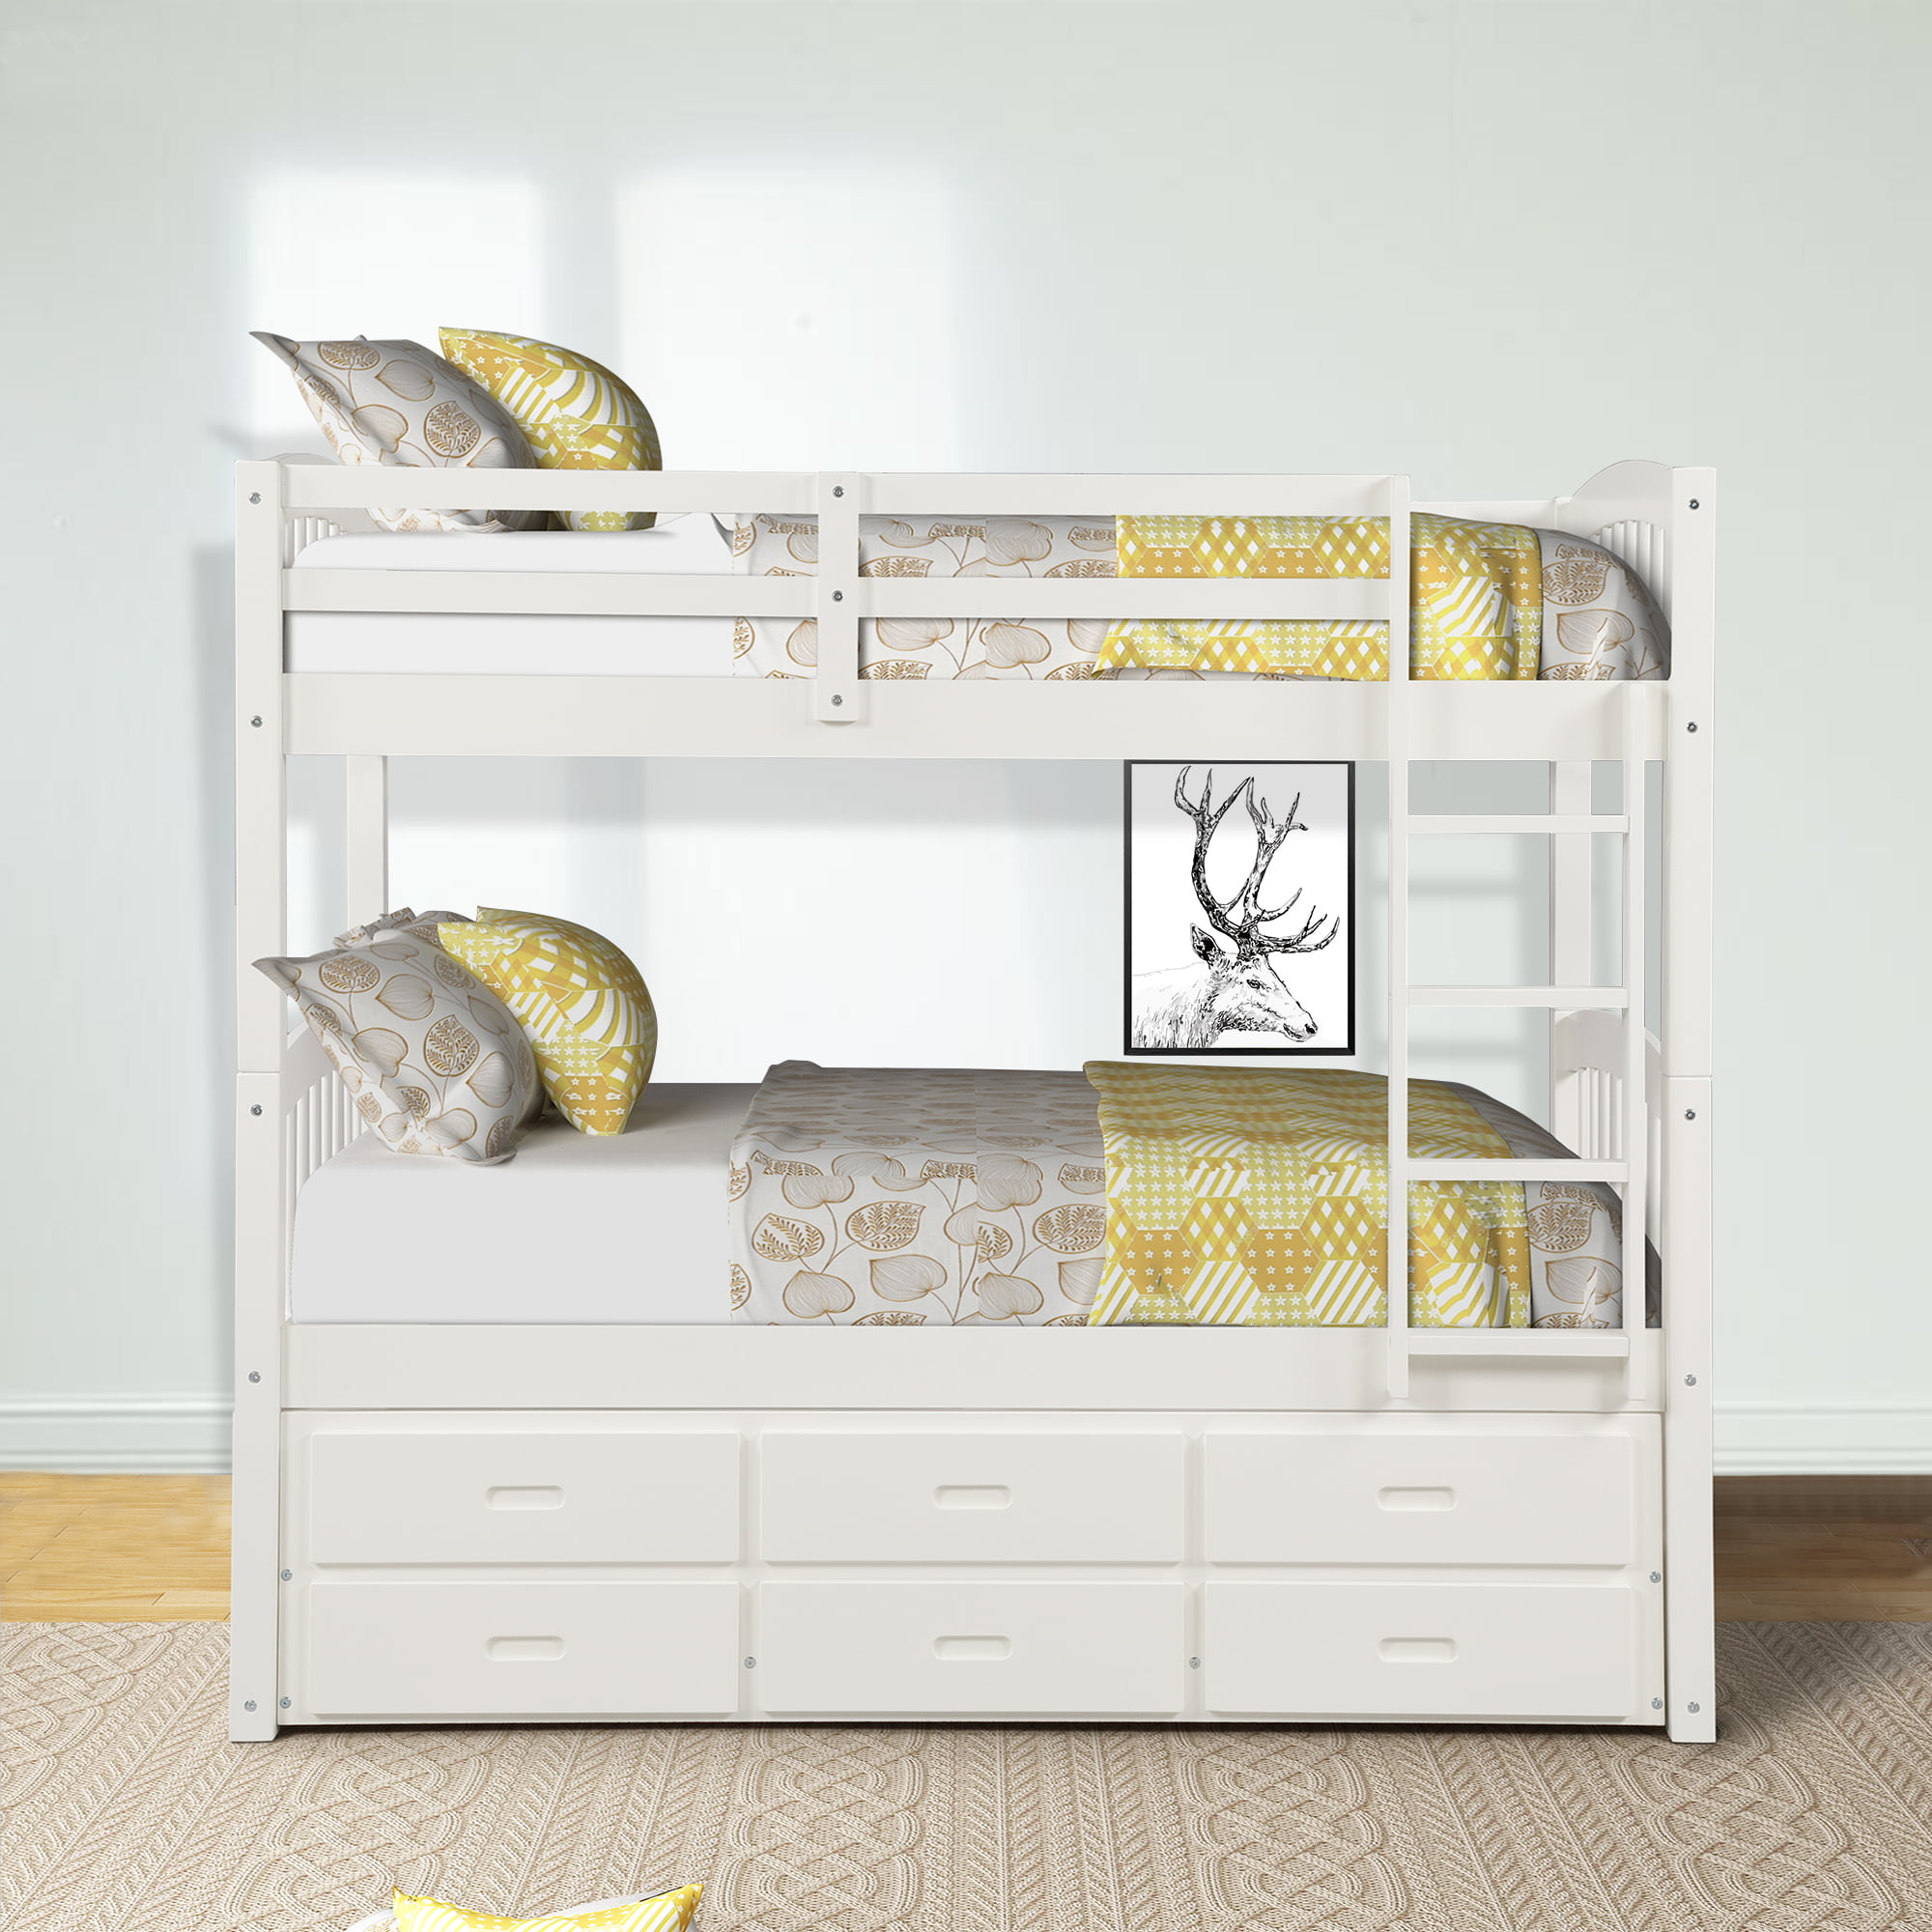 Urhomepro Bunk Beds For Kids Wood Twin, Do You Need A Boxspring For A Bunk Bed